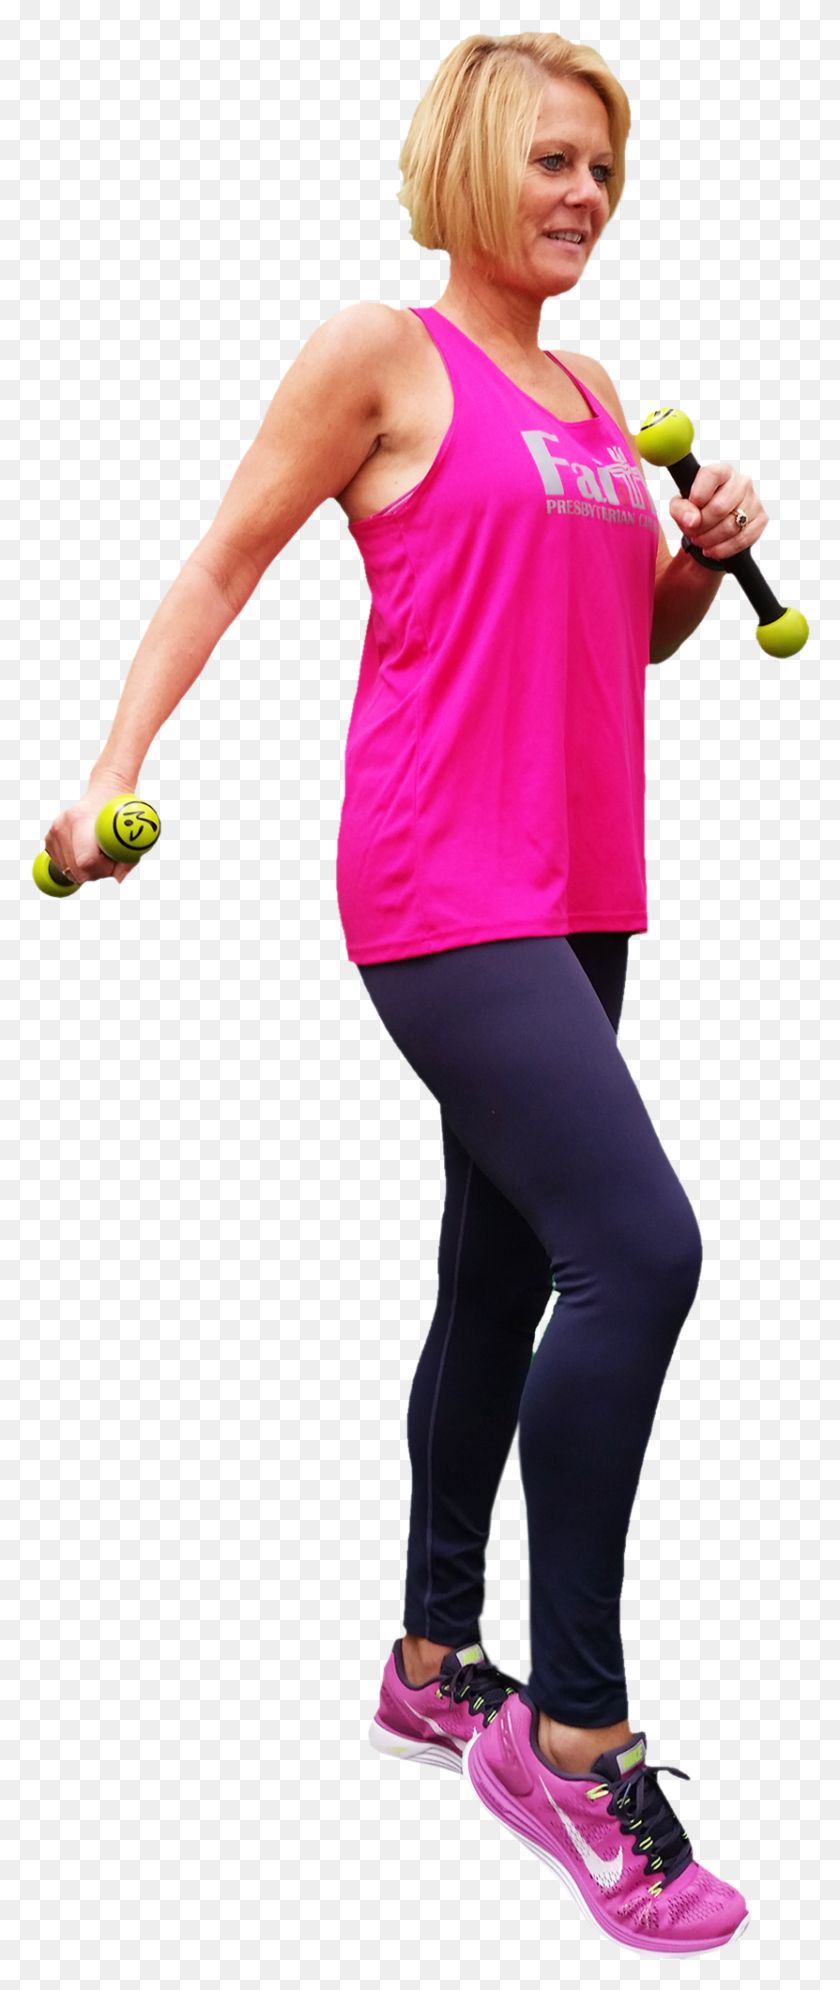 831x2057 Descargar Pngzumba Fitness Michelle Jogging, Persona, Humano, Ropa Hd Png